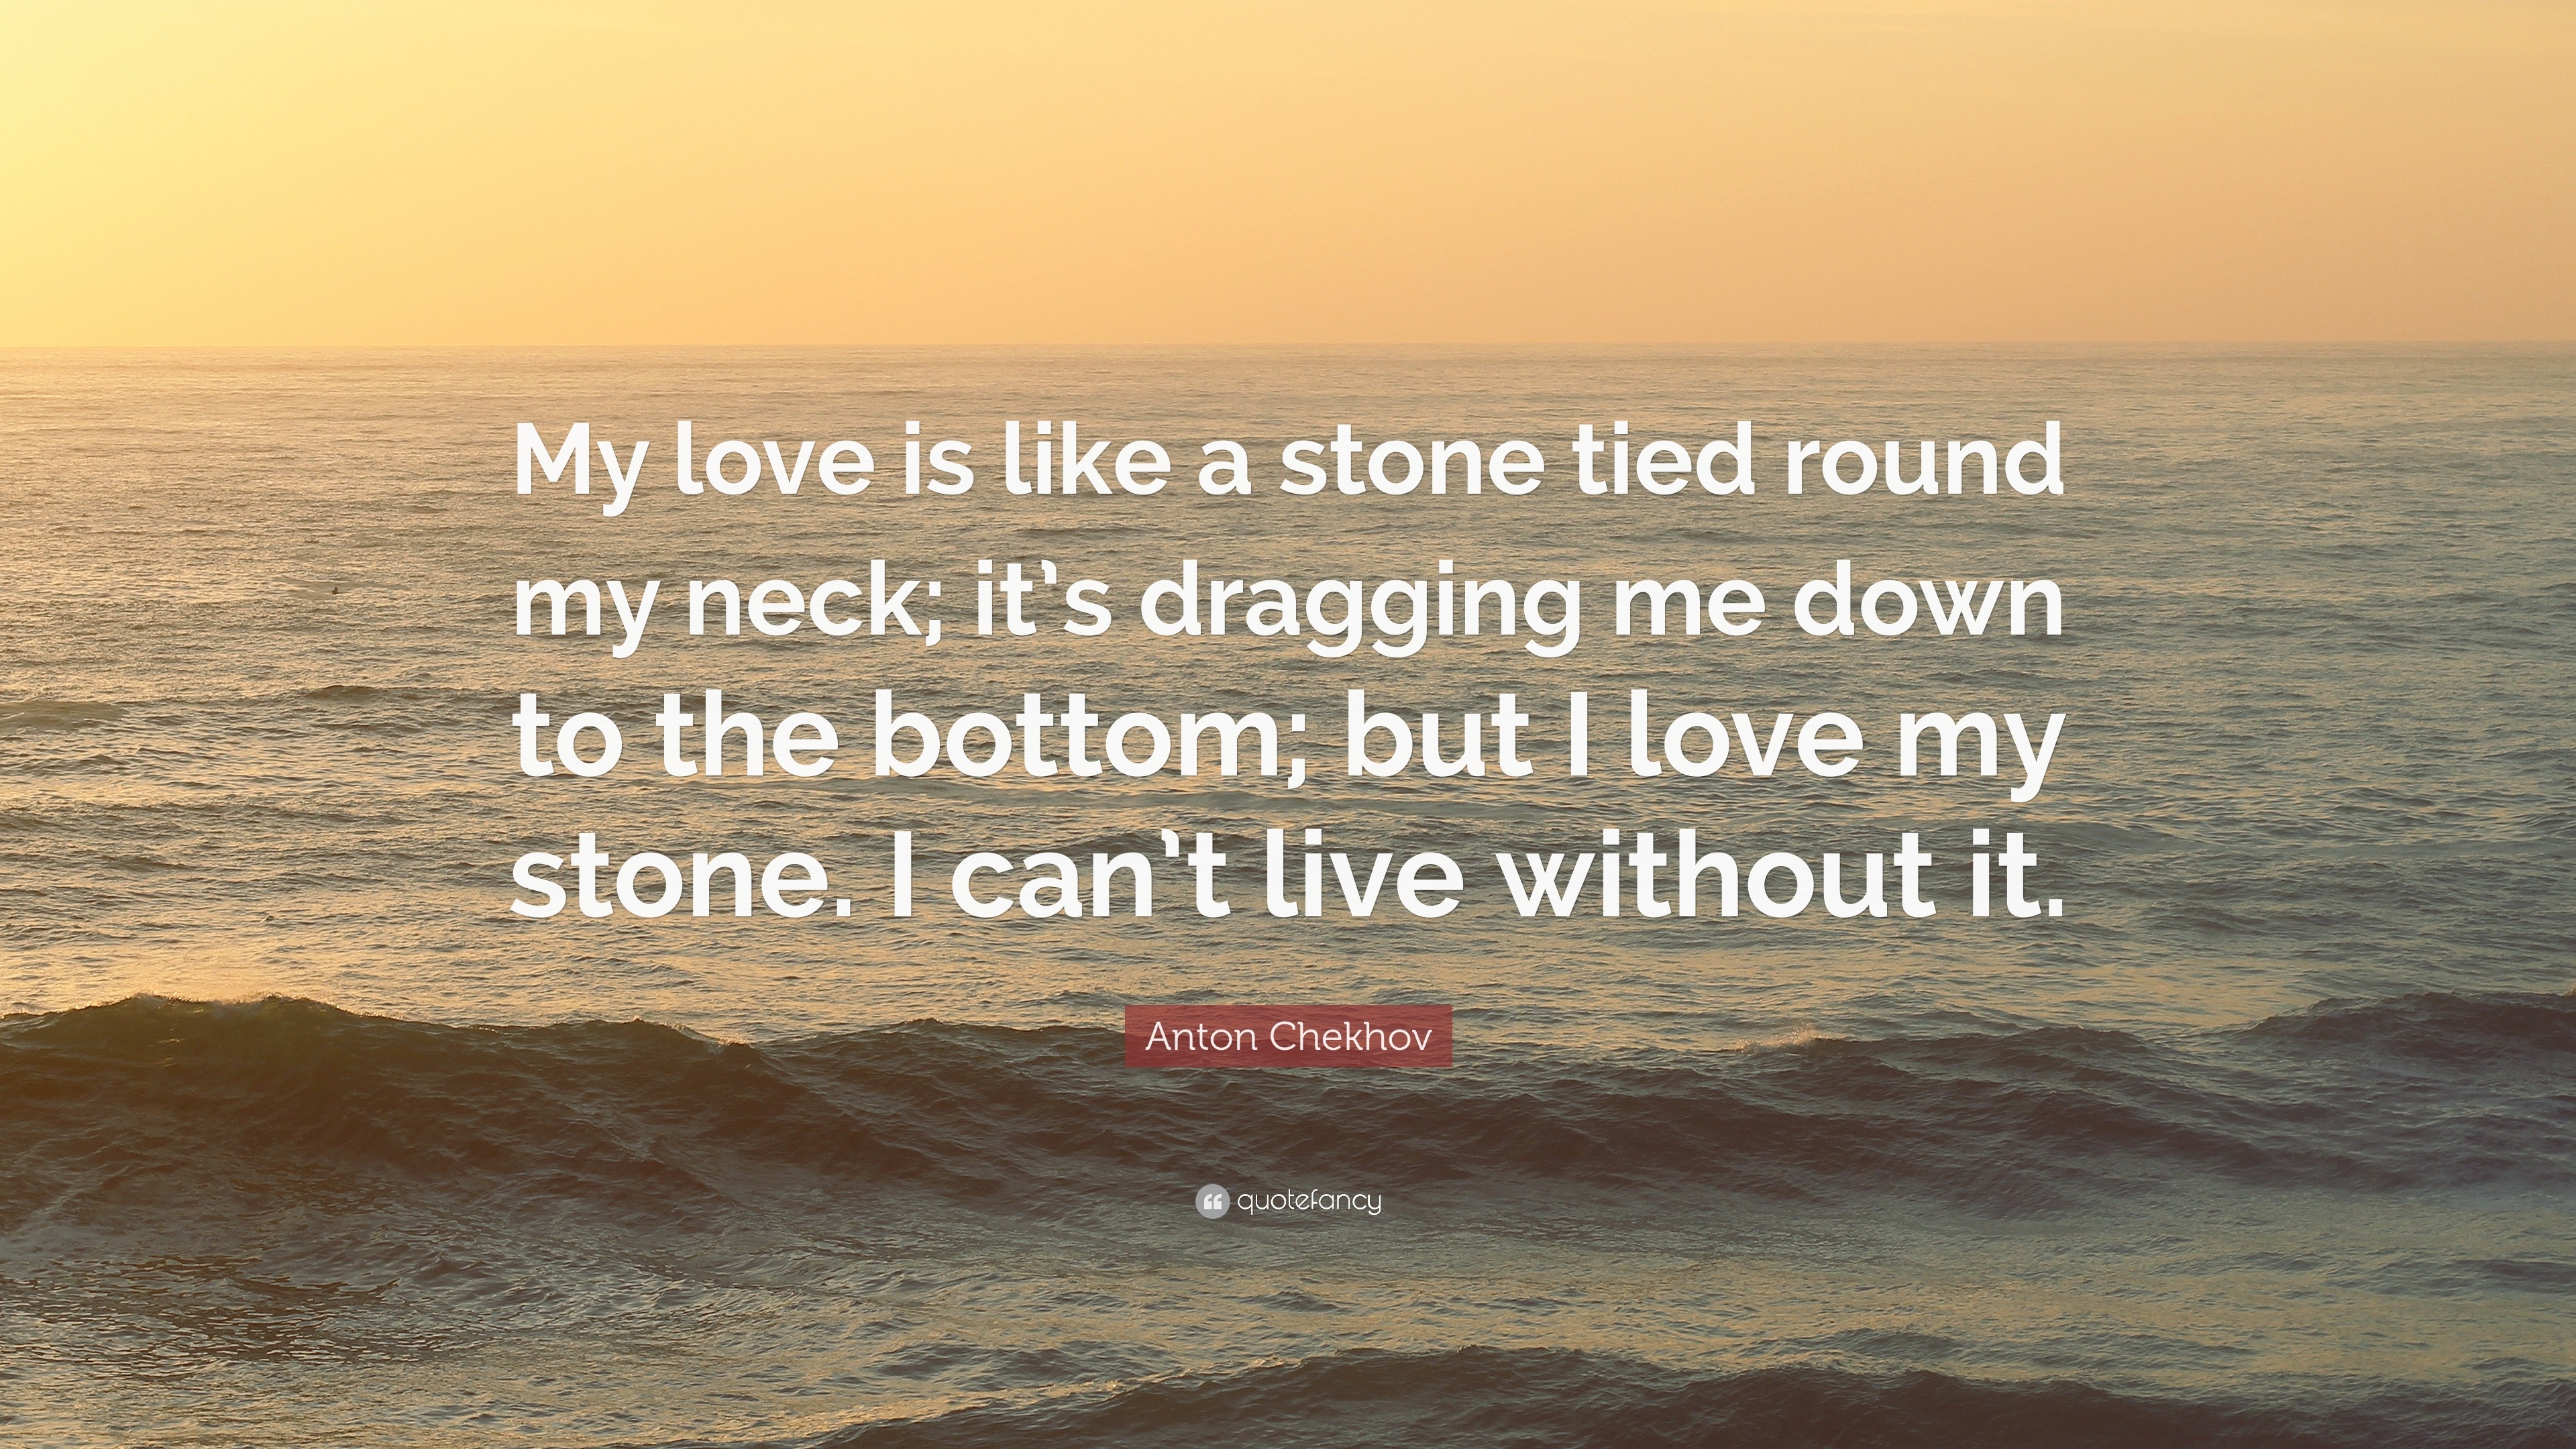 Anton Chekhov Quote “My love is like a stone tied round my neck